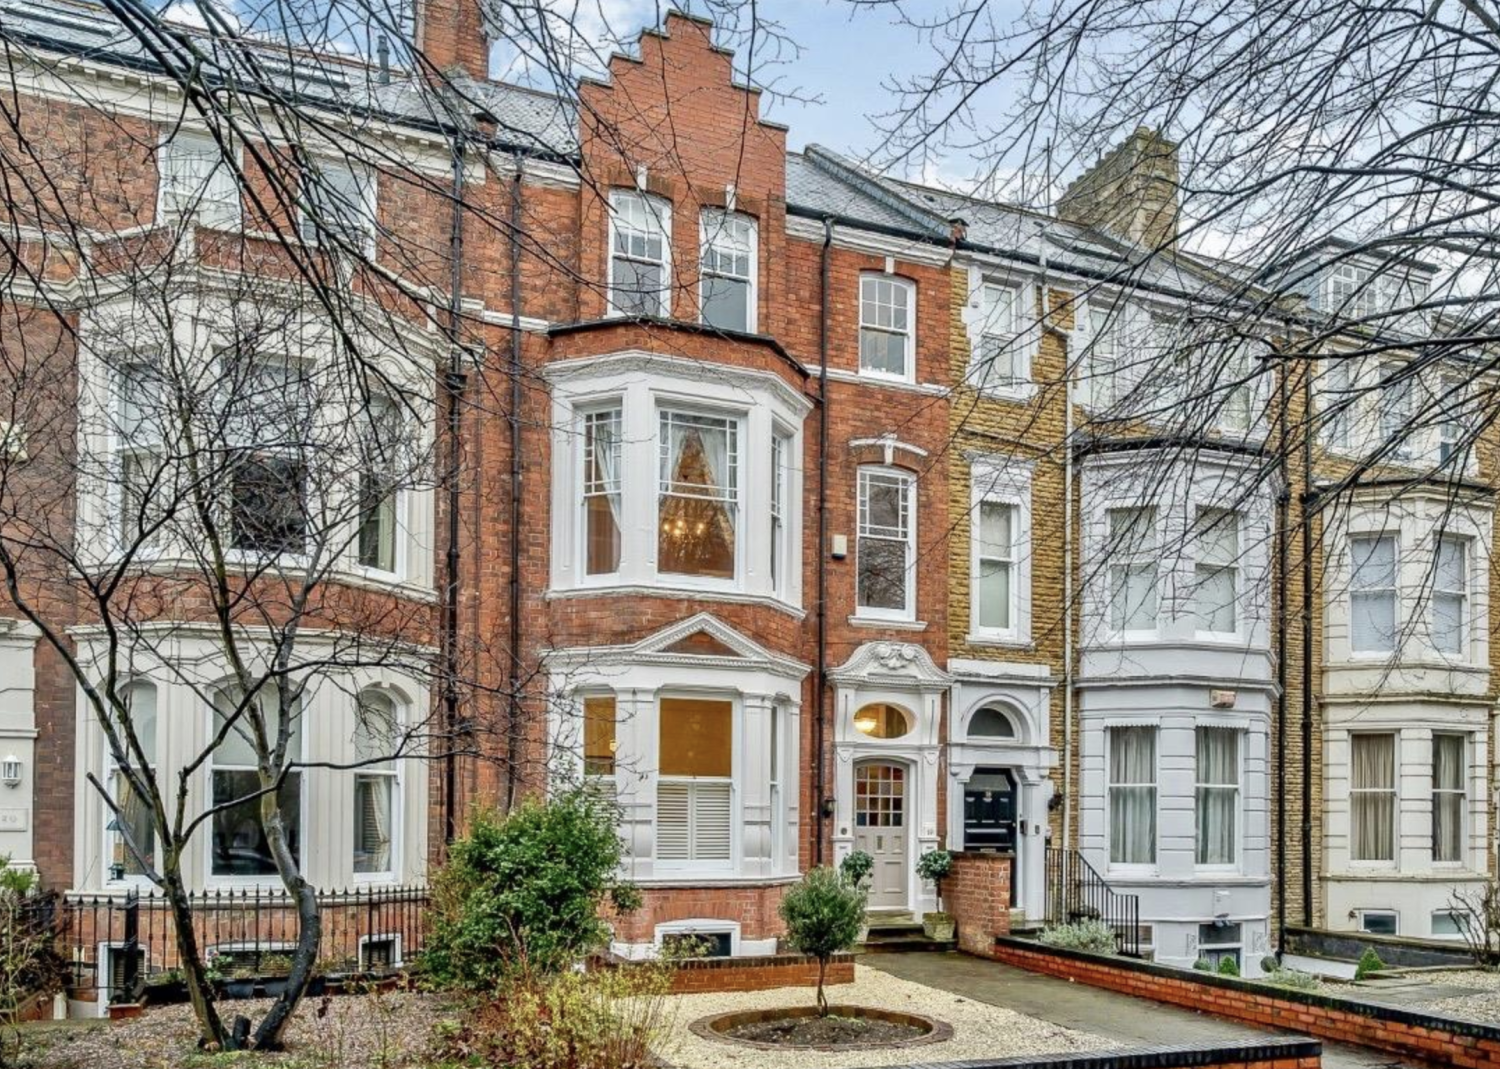 Large red brick Victorian townhouse with bay windows and a front garden with small shrubs and paved area